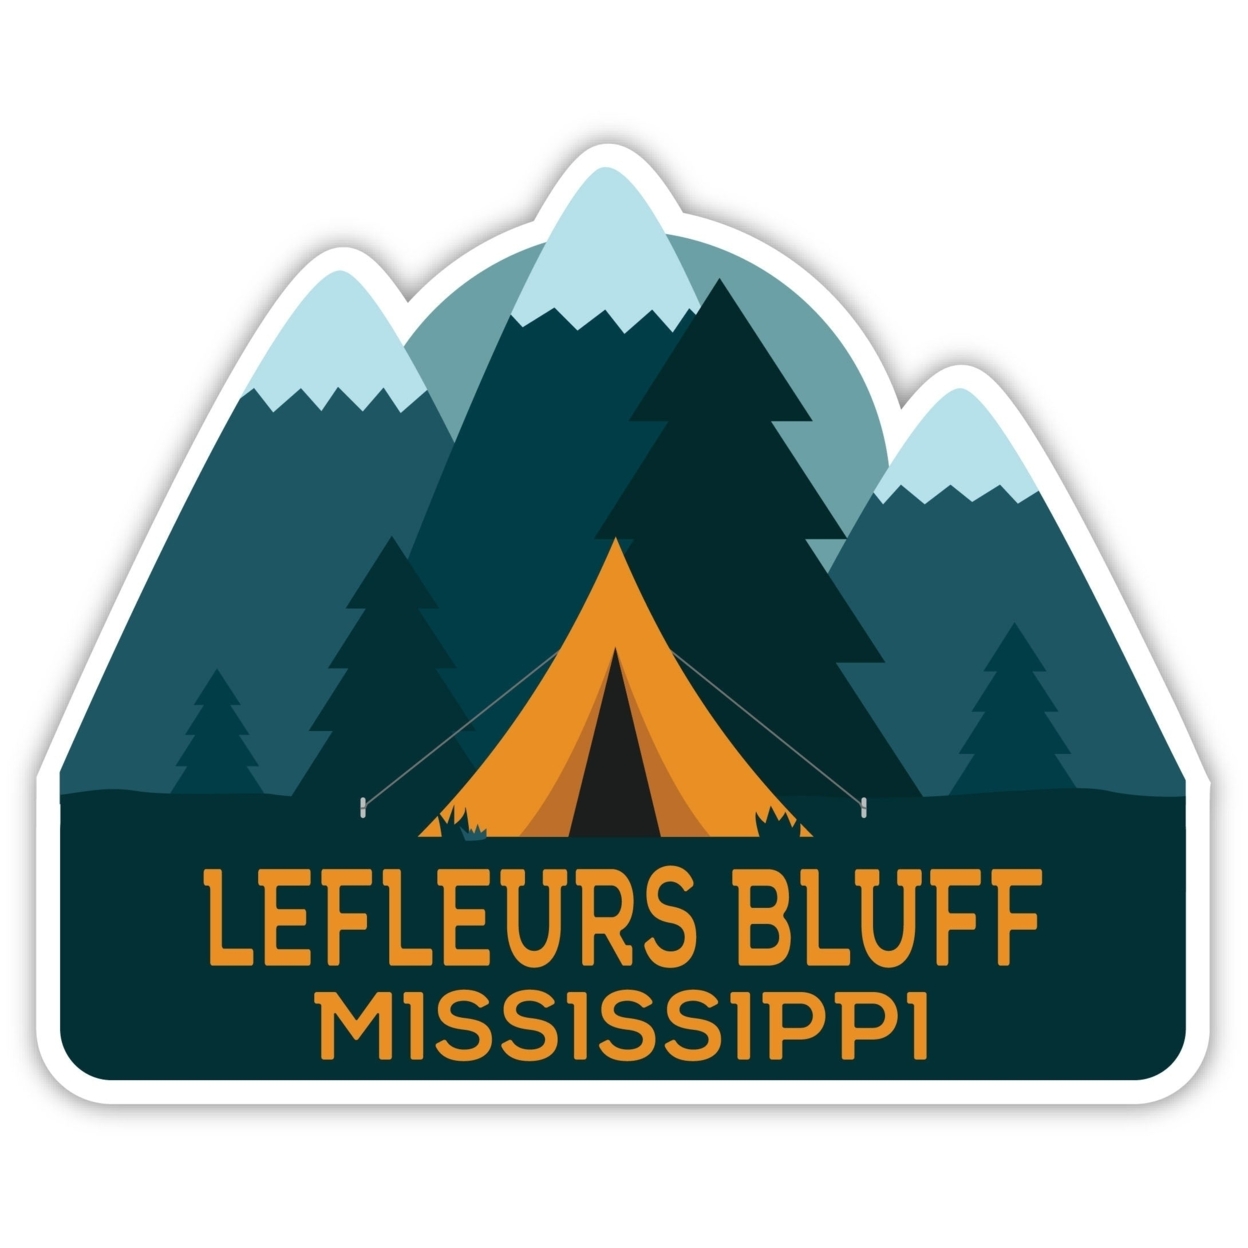 Lefleurs Bluff Mississippi Souvenir Decorative Stickers (Choose Theme And Size) - 2-Inch, Tent